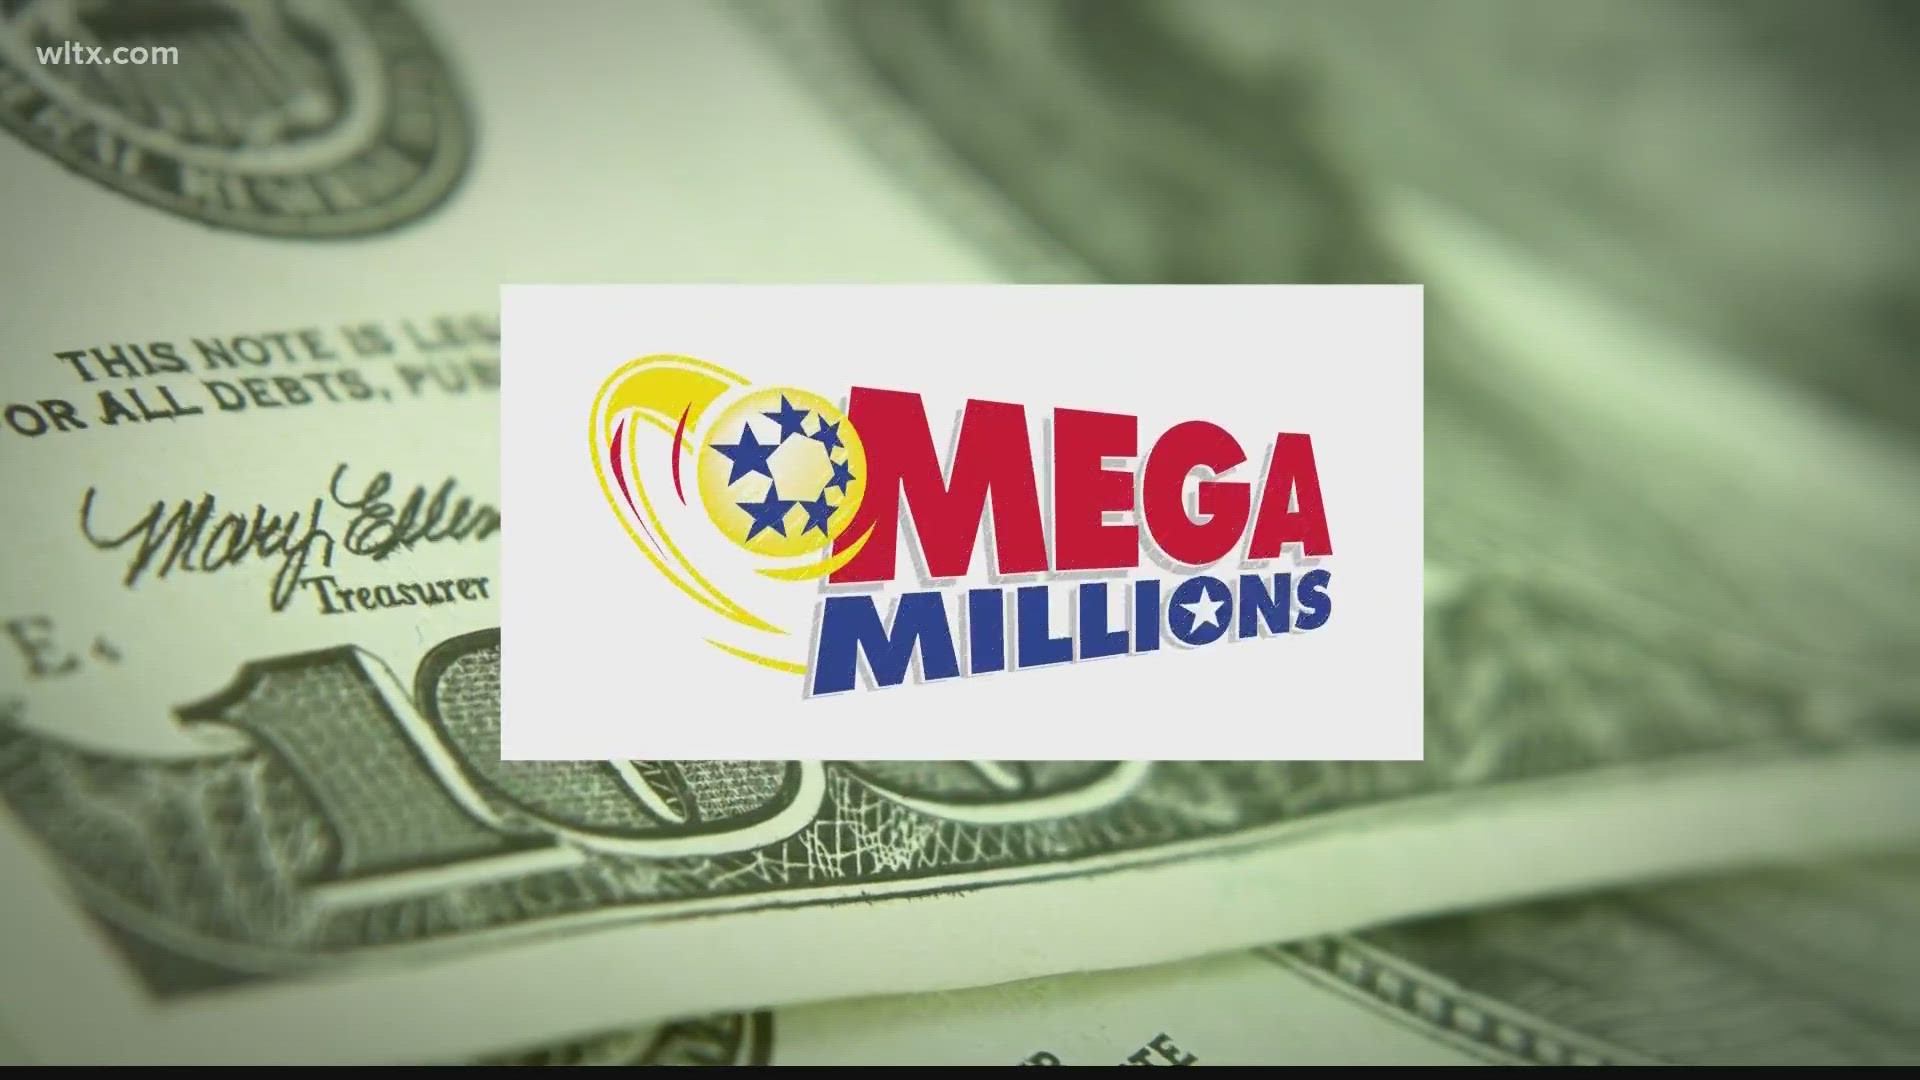 Here are the winning Mega Millions numbers for Friday, March 17, 2023.